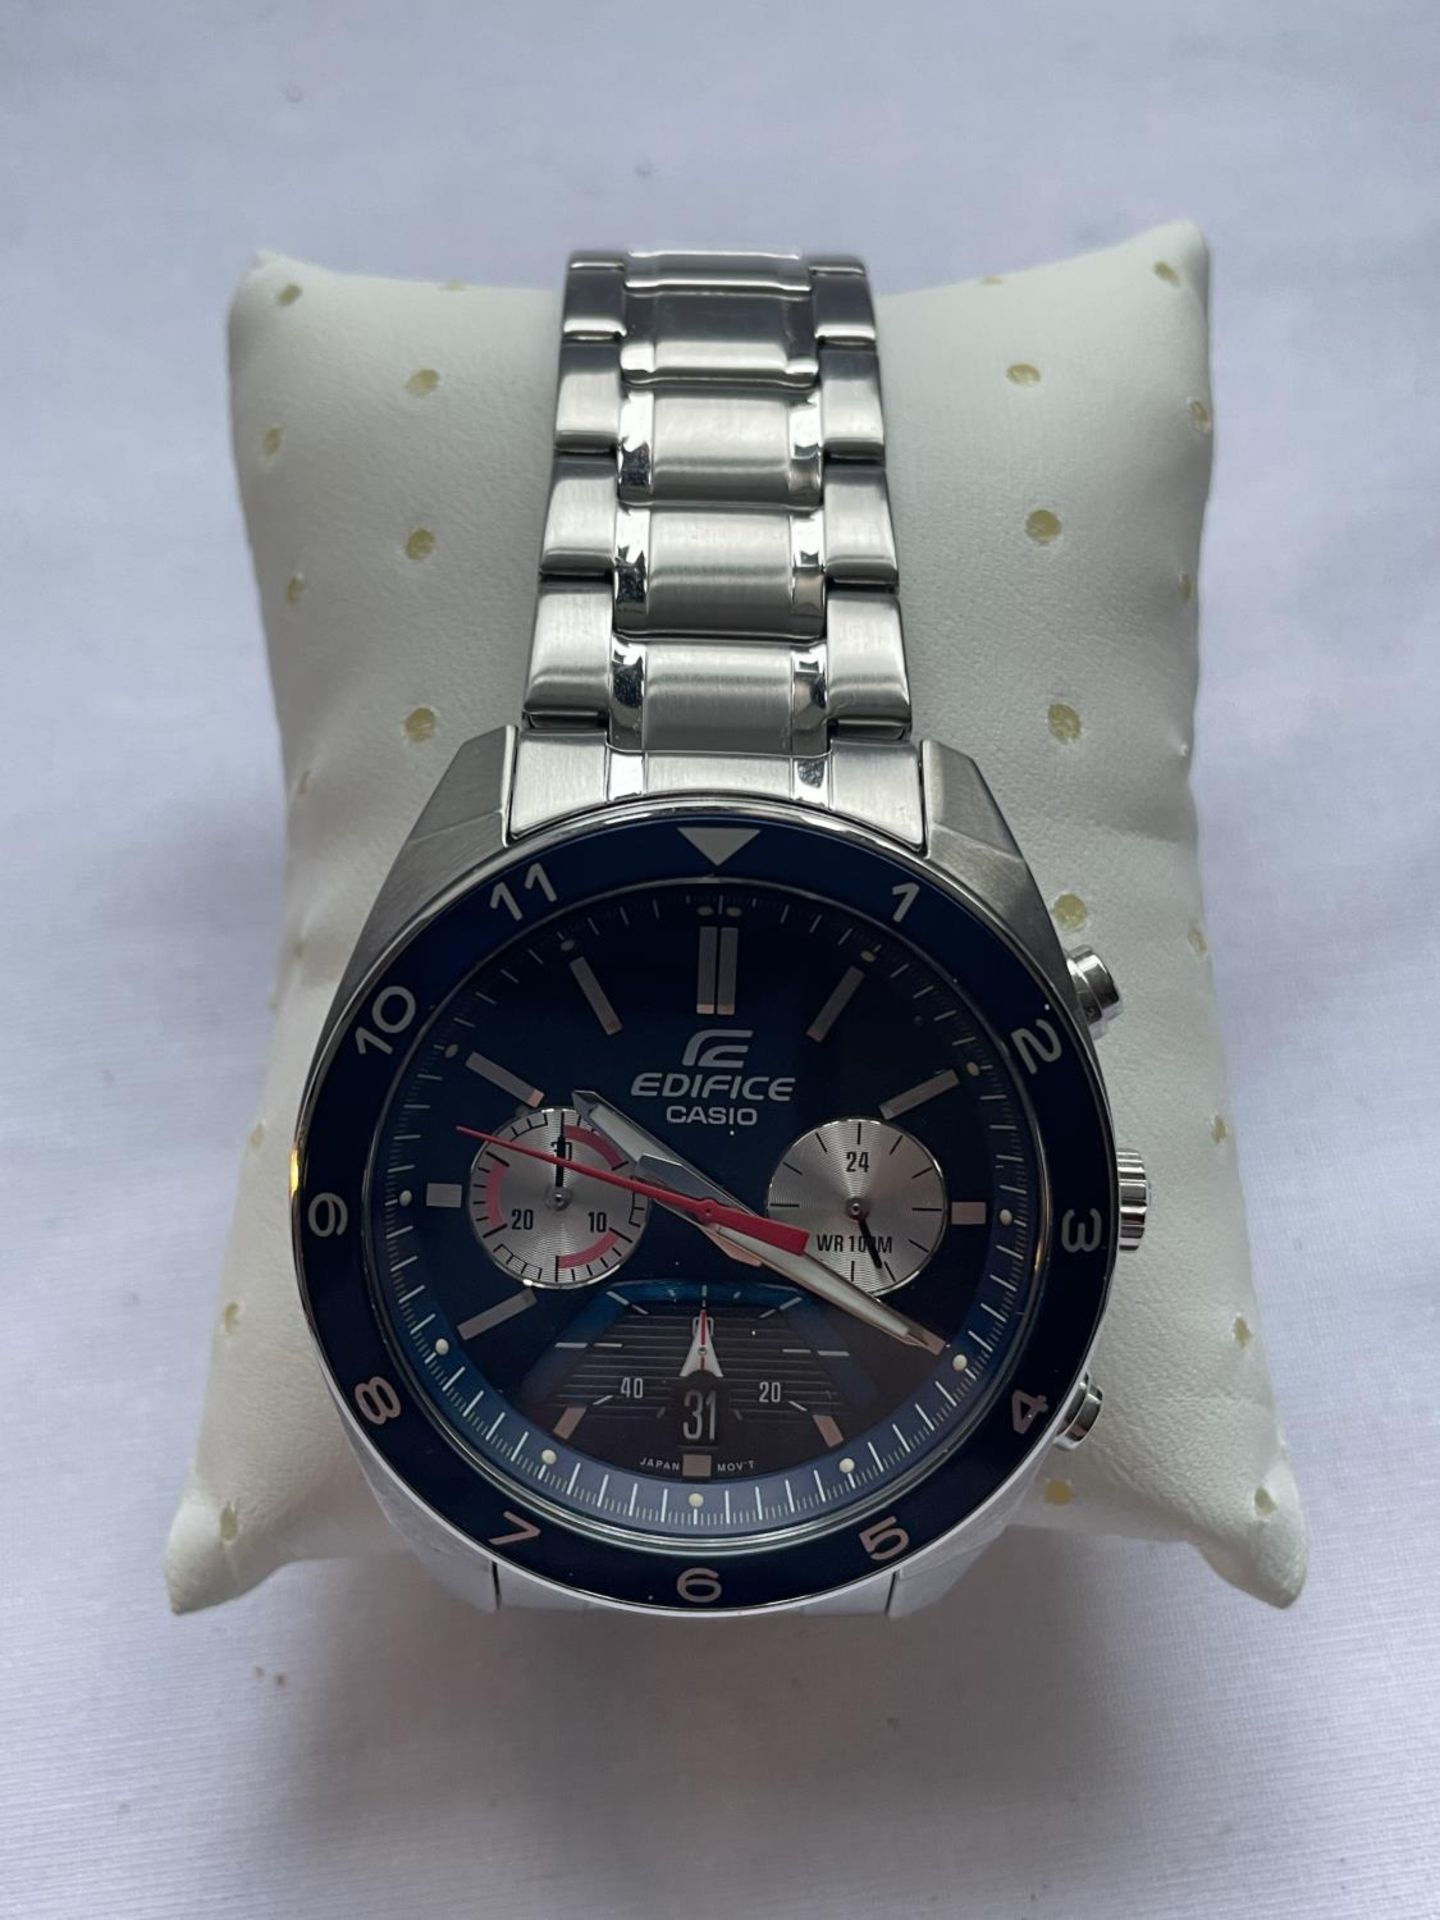 AN AS NEW AND BOXED CASIO EDIFICE WRIST WATCH SEEN WORKING BUT NO WARRANTY - Image 2 of 5